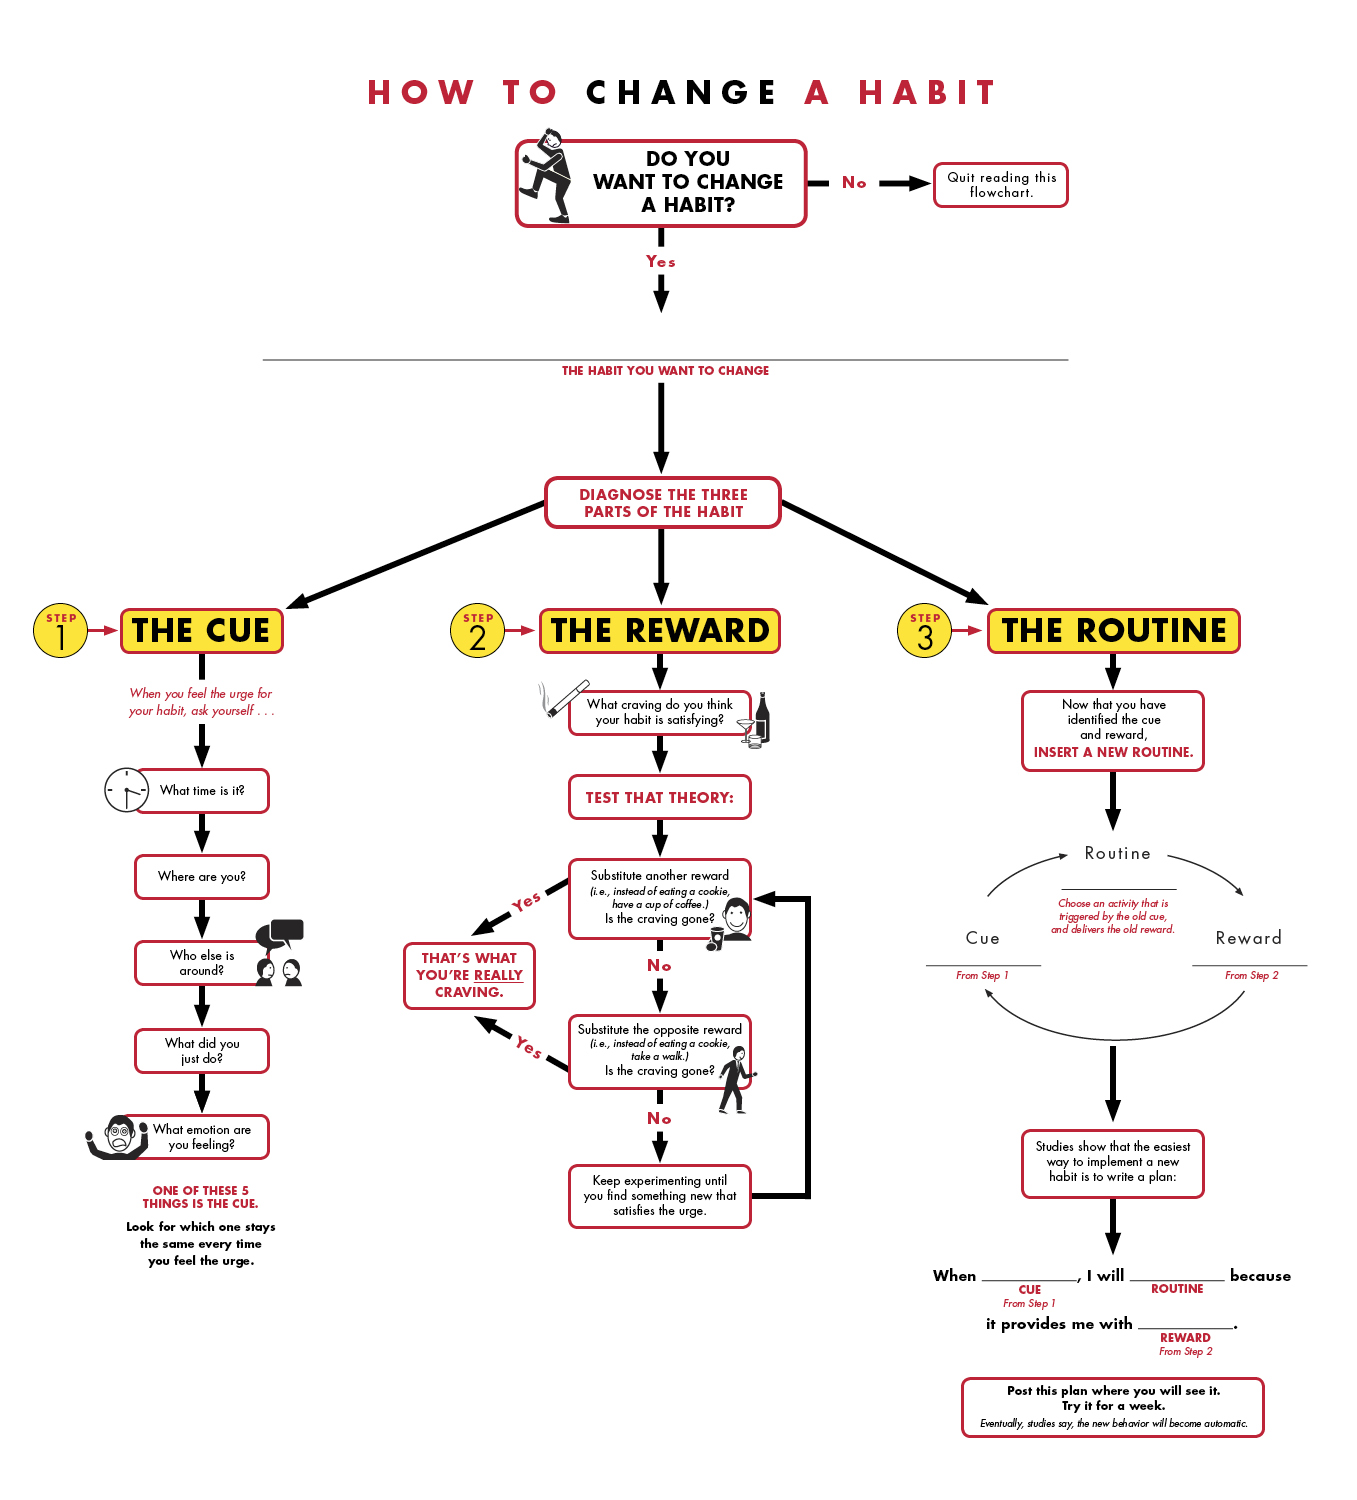 Image from CharlesDuhigg.com: a flowchart for discovering ways to replace one habit with another